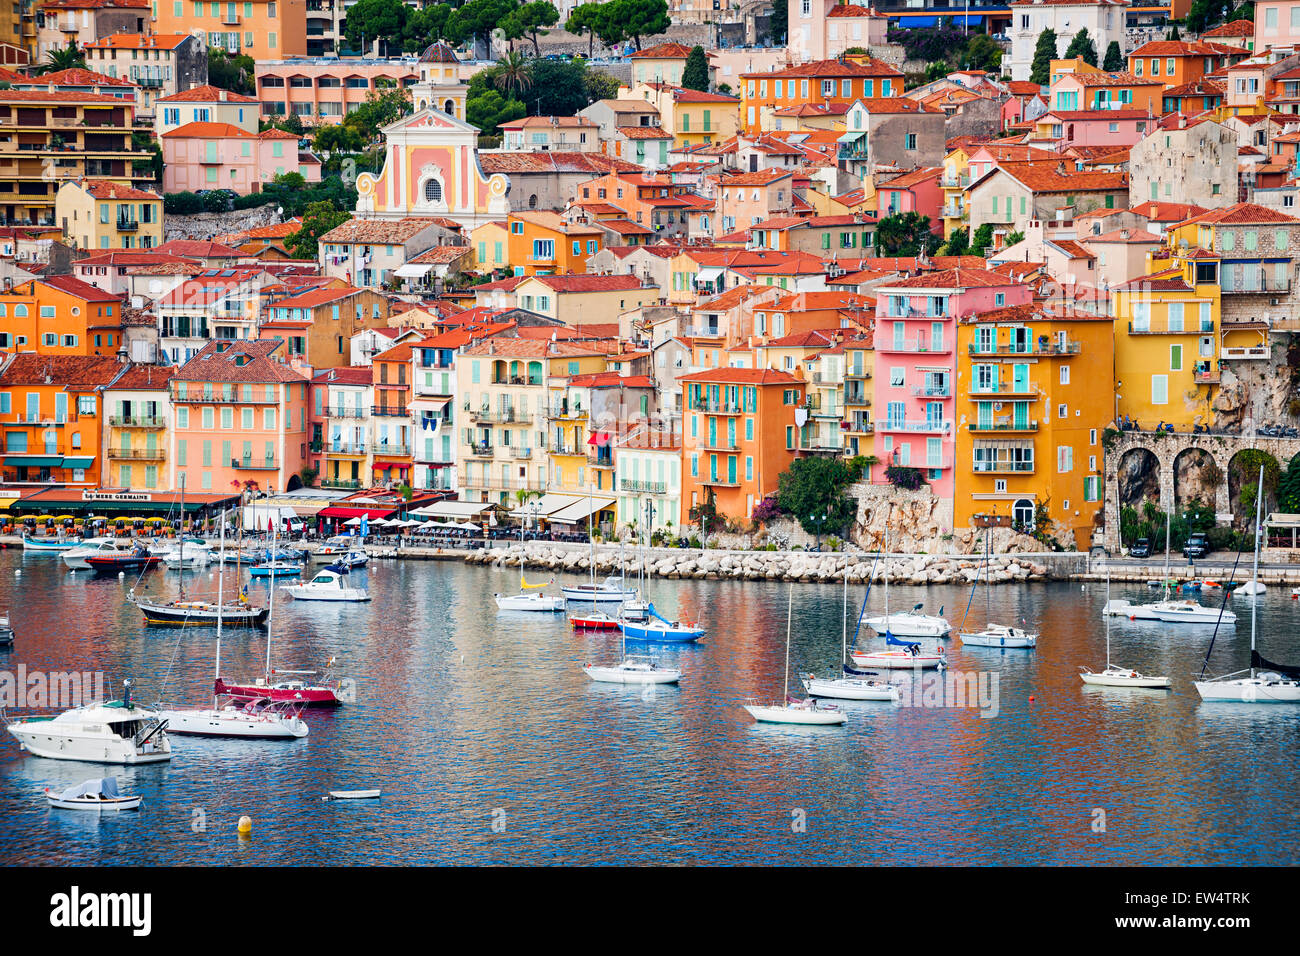 VILLEFRANCHE-SUR-MER, FRANCE - OCTOBER 1, 2014: Colorful waterfront of picturesque French Riviera town with leisure boats anchor Stock Photo